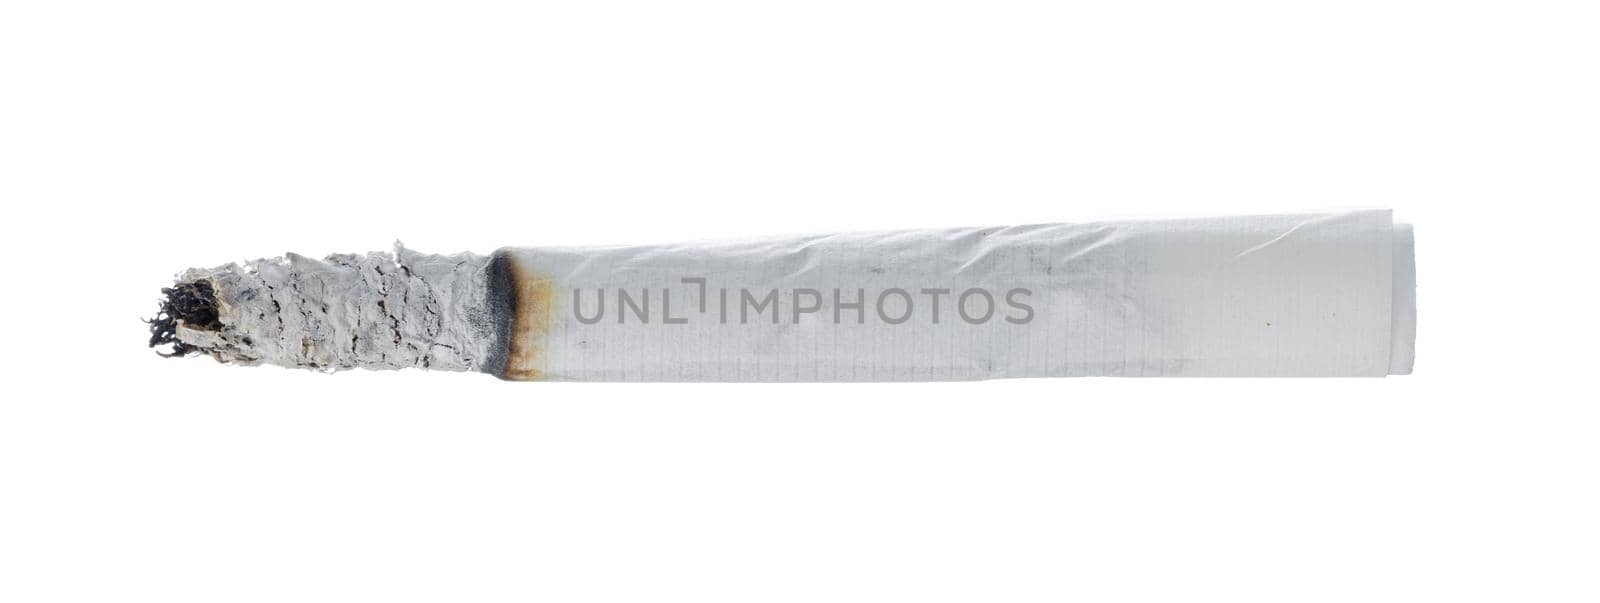 Burning cigarette isolated on white background close up top view